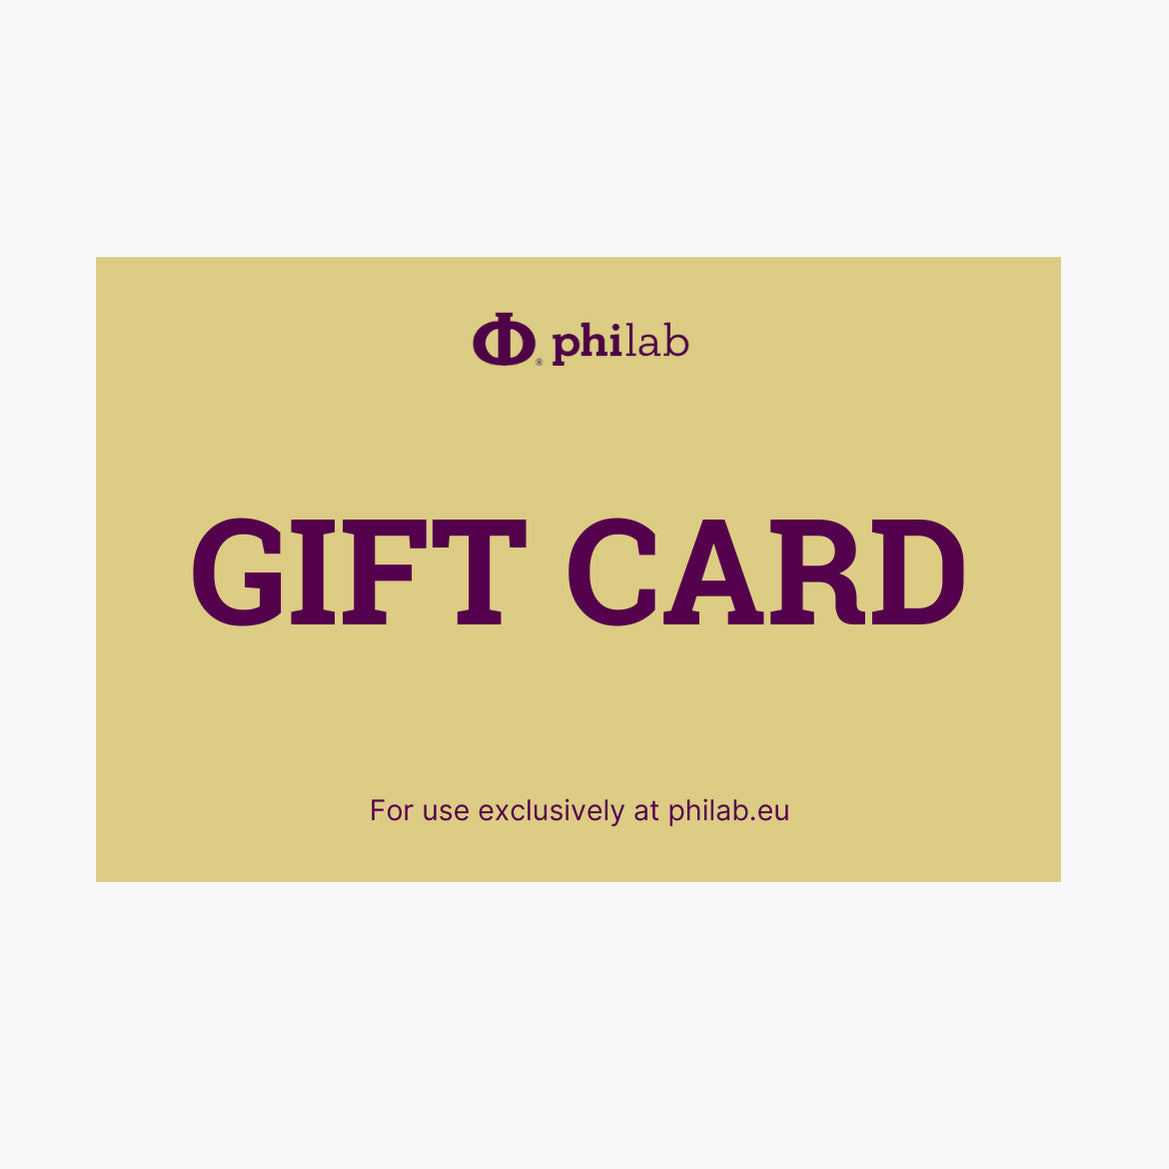 Philab branded gift card in gold with the logo and 'GIFT CARD' text, exclusive for philab.eu.